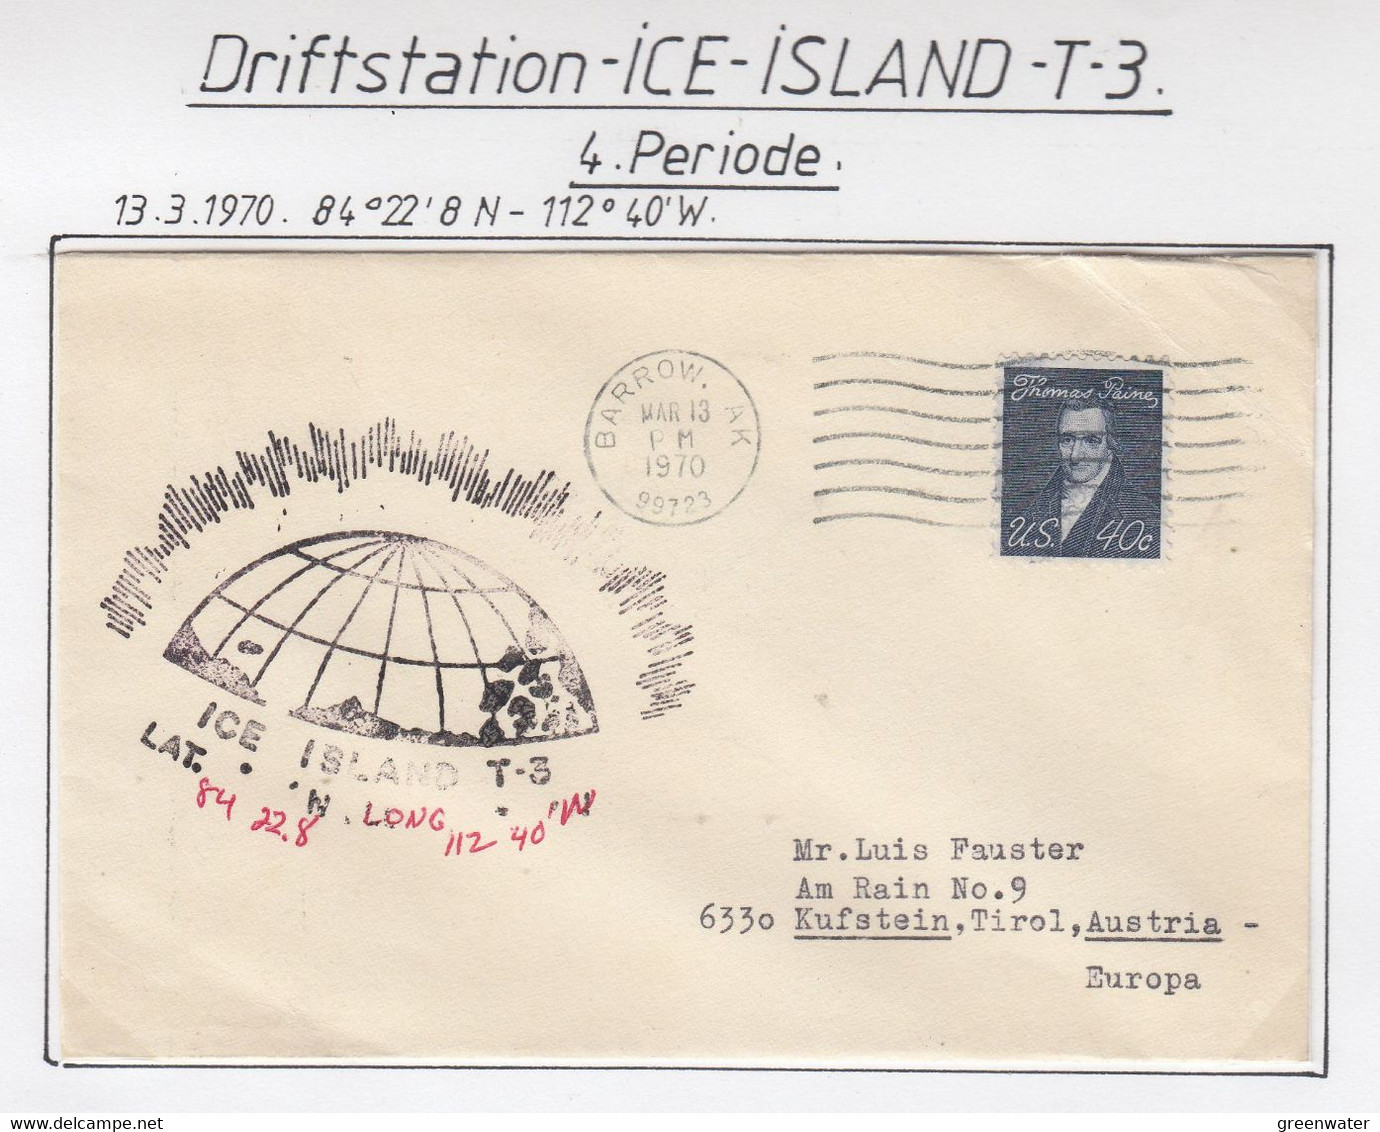 USA Driftstation ICE-ISLAND T-3 Cover  Ice Island T-3 Periode 4 Ca MAR 13 1970  (DR134) - Stations Scientifiques & Stations Dérivantes Arctiques